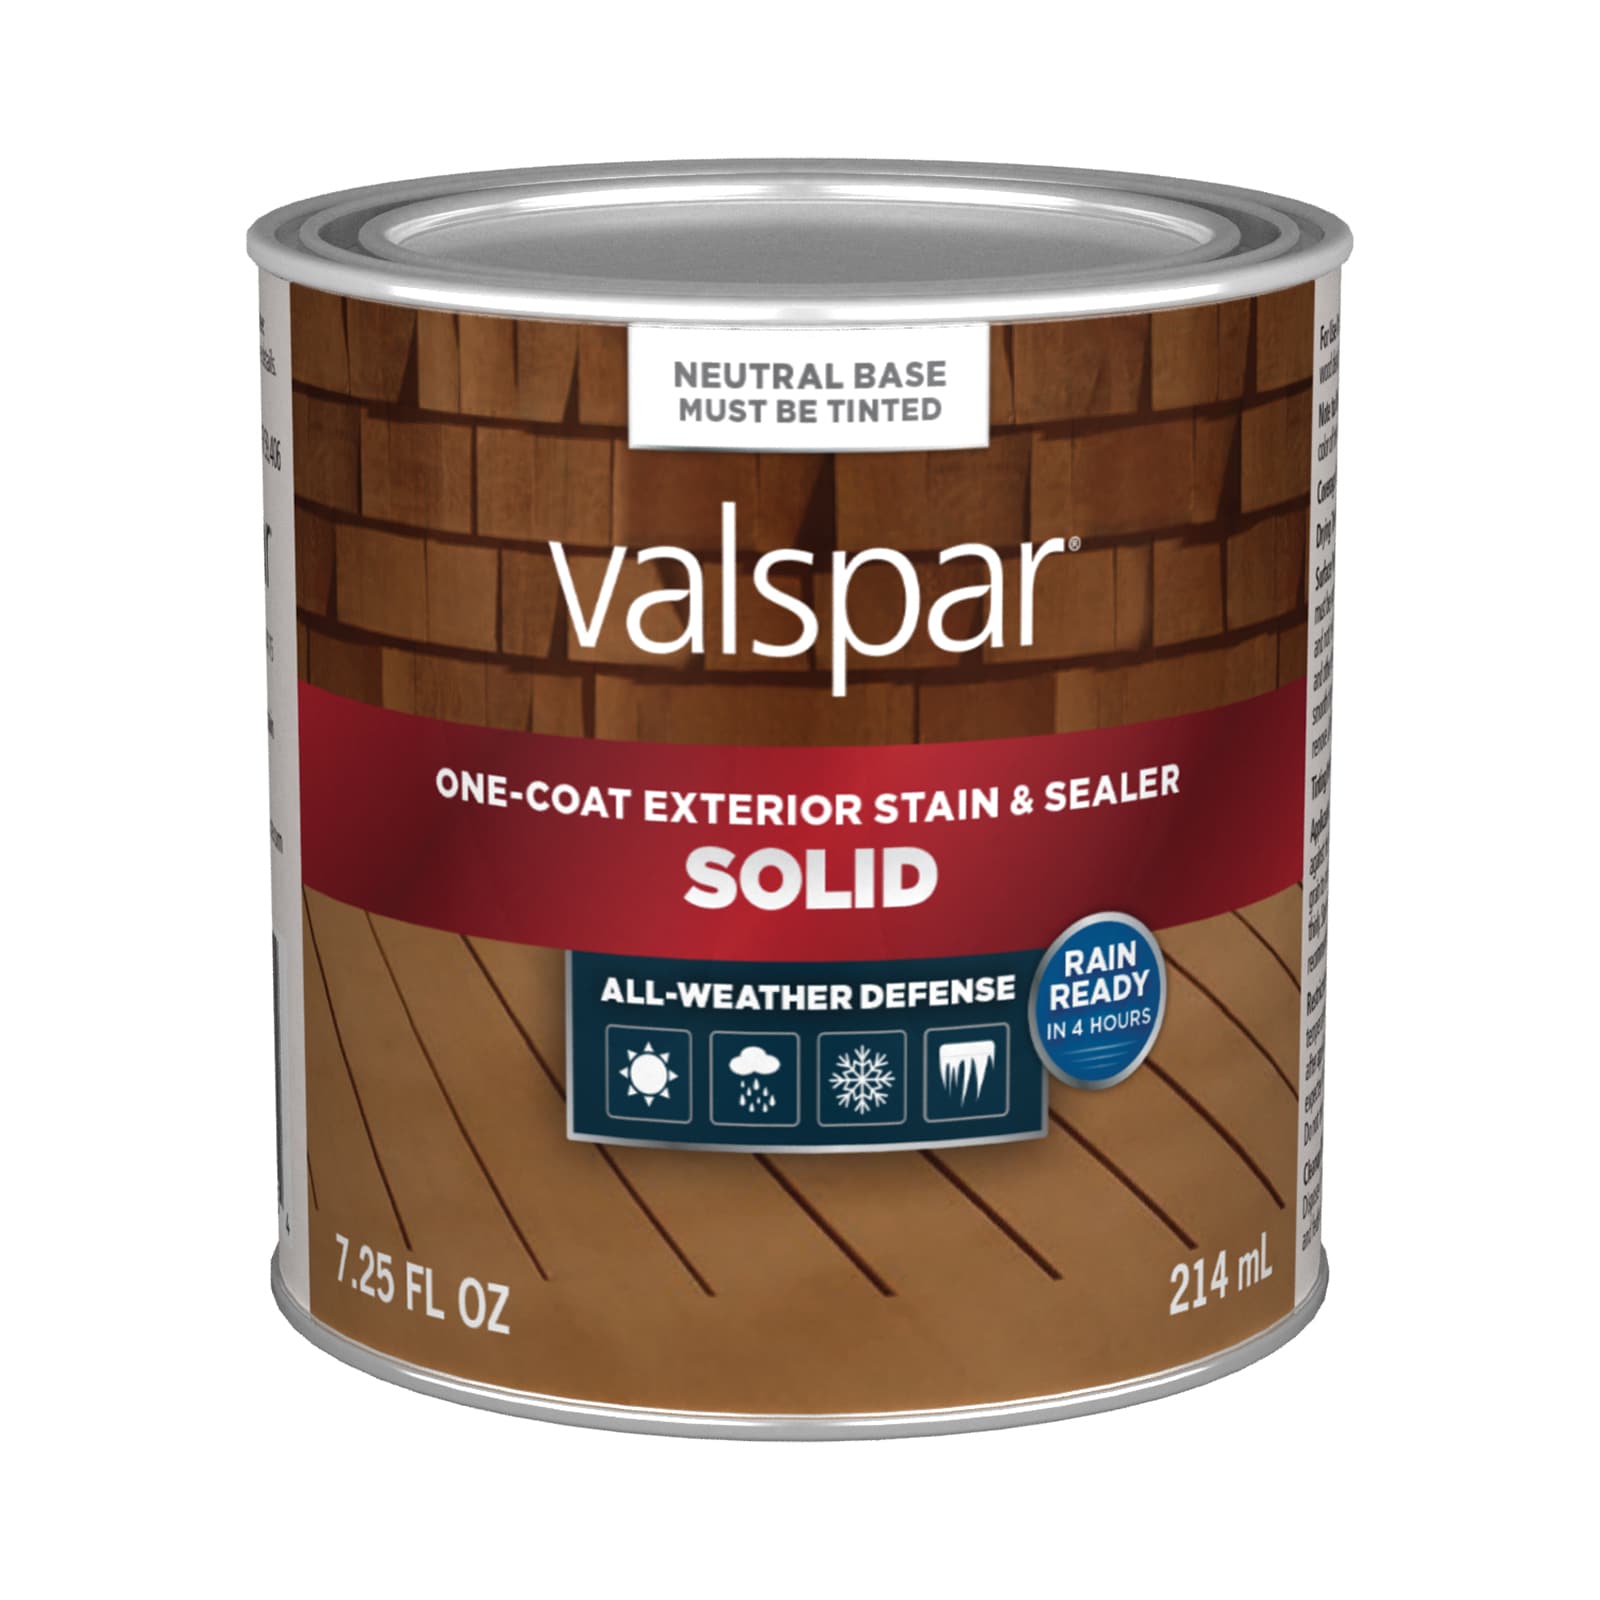 All-in-One Wood Prep - Valspar® Stain